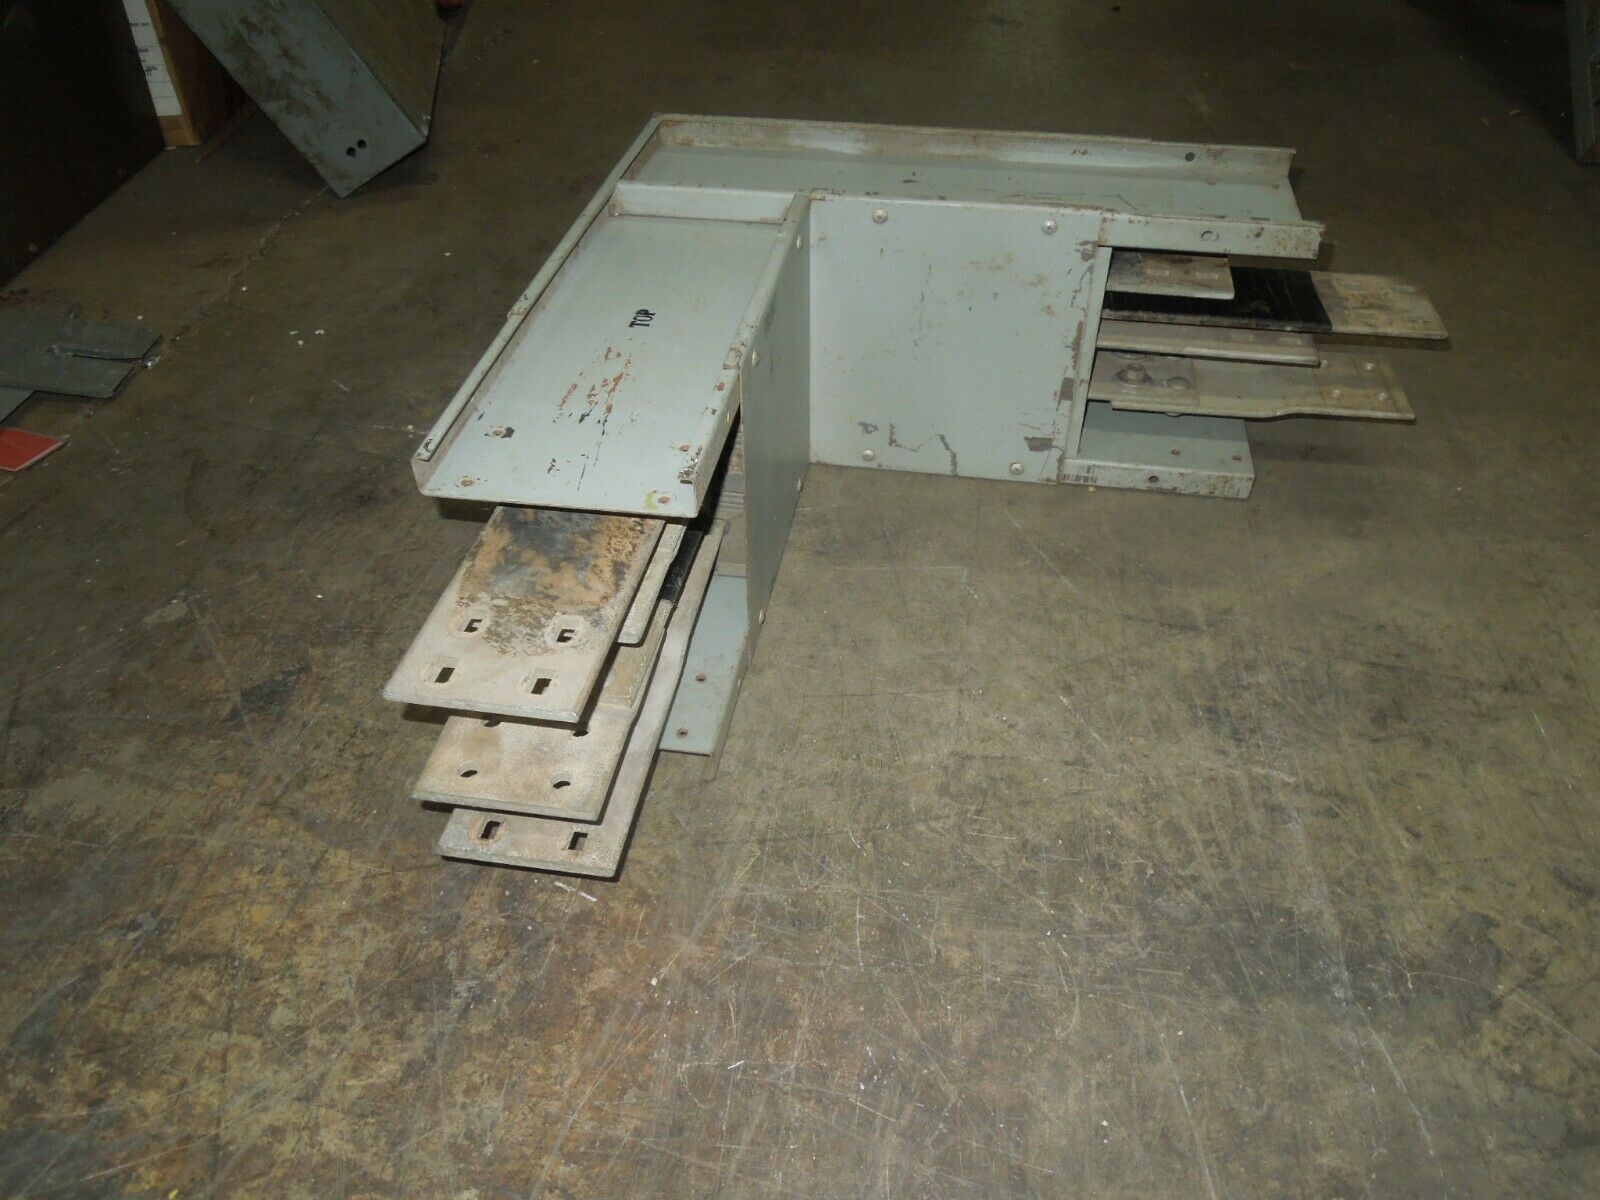 FPE Bus Duct 2901-0149 Aluminum Busway 800A 3Ph 4W 277/480V Flatwise Elbow - $2,500.00